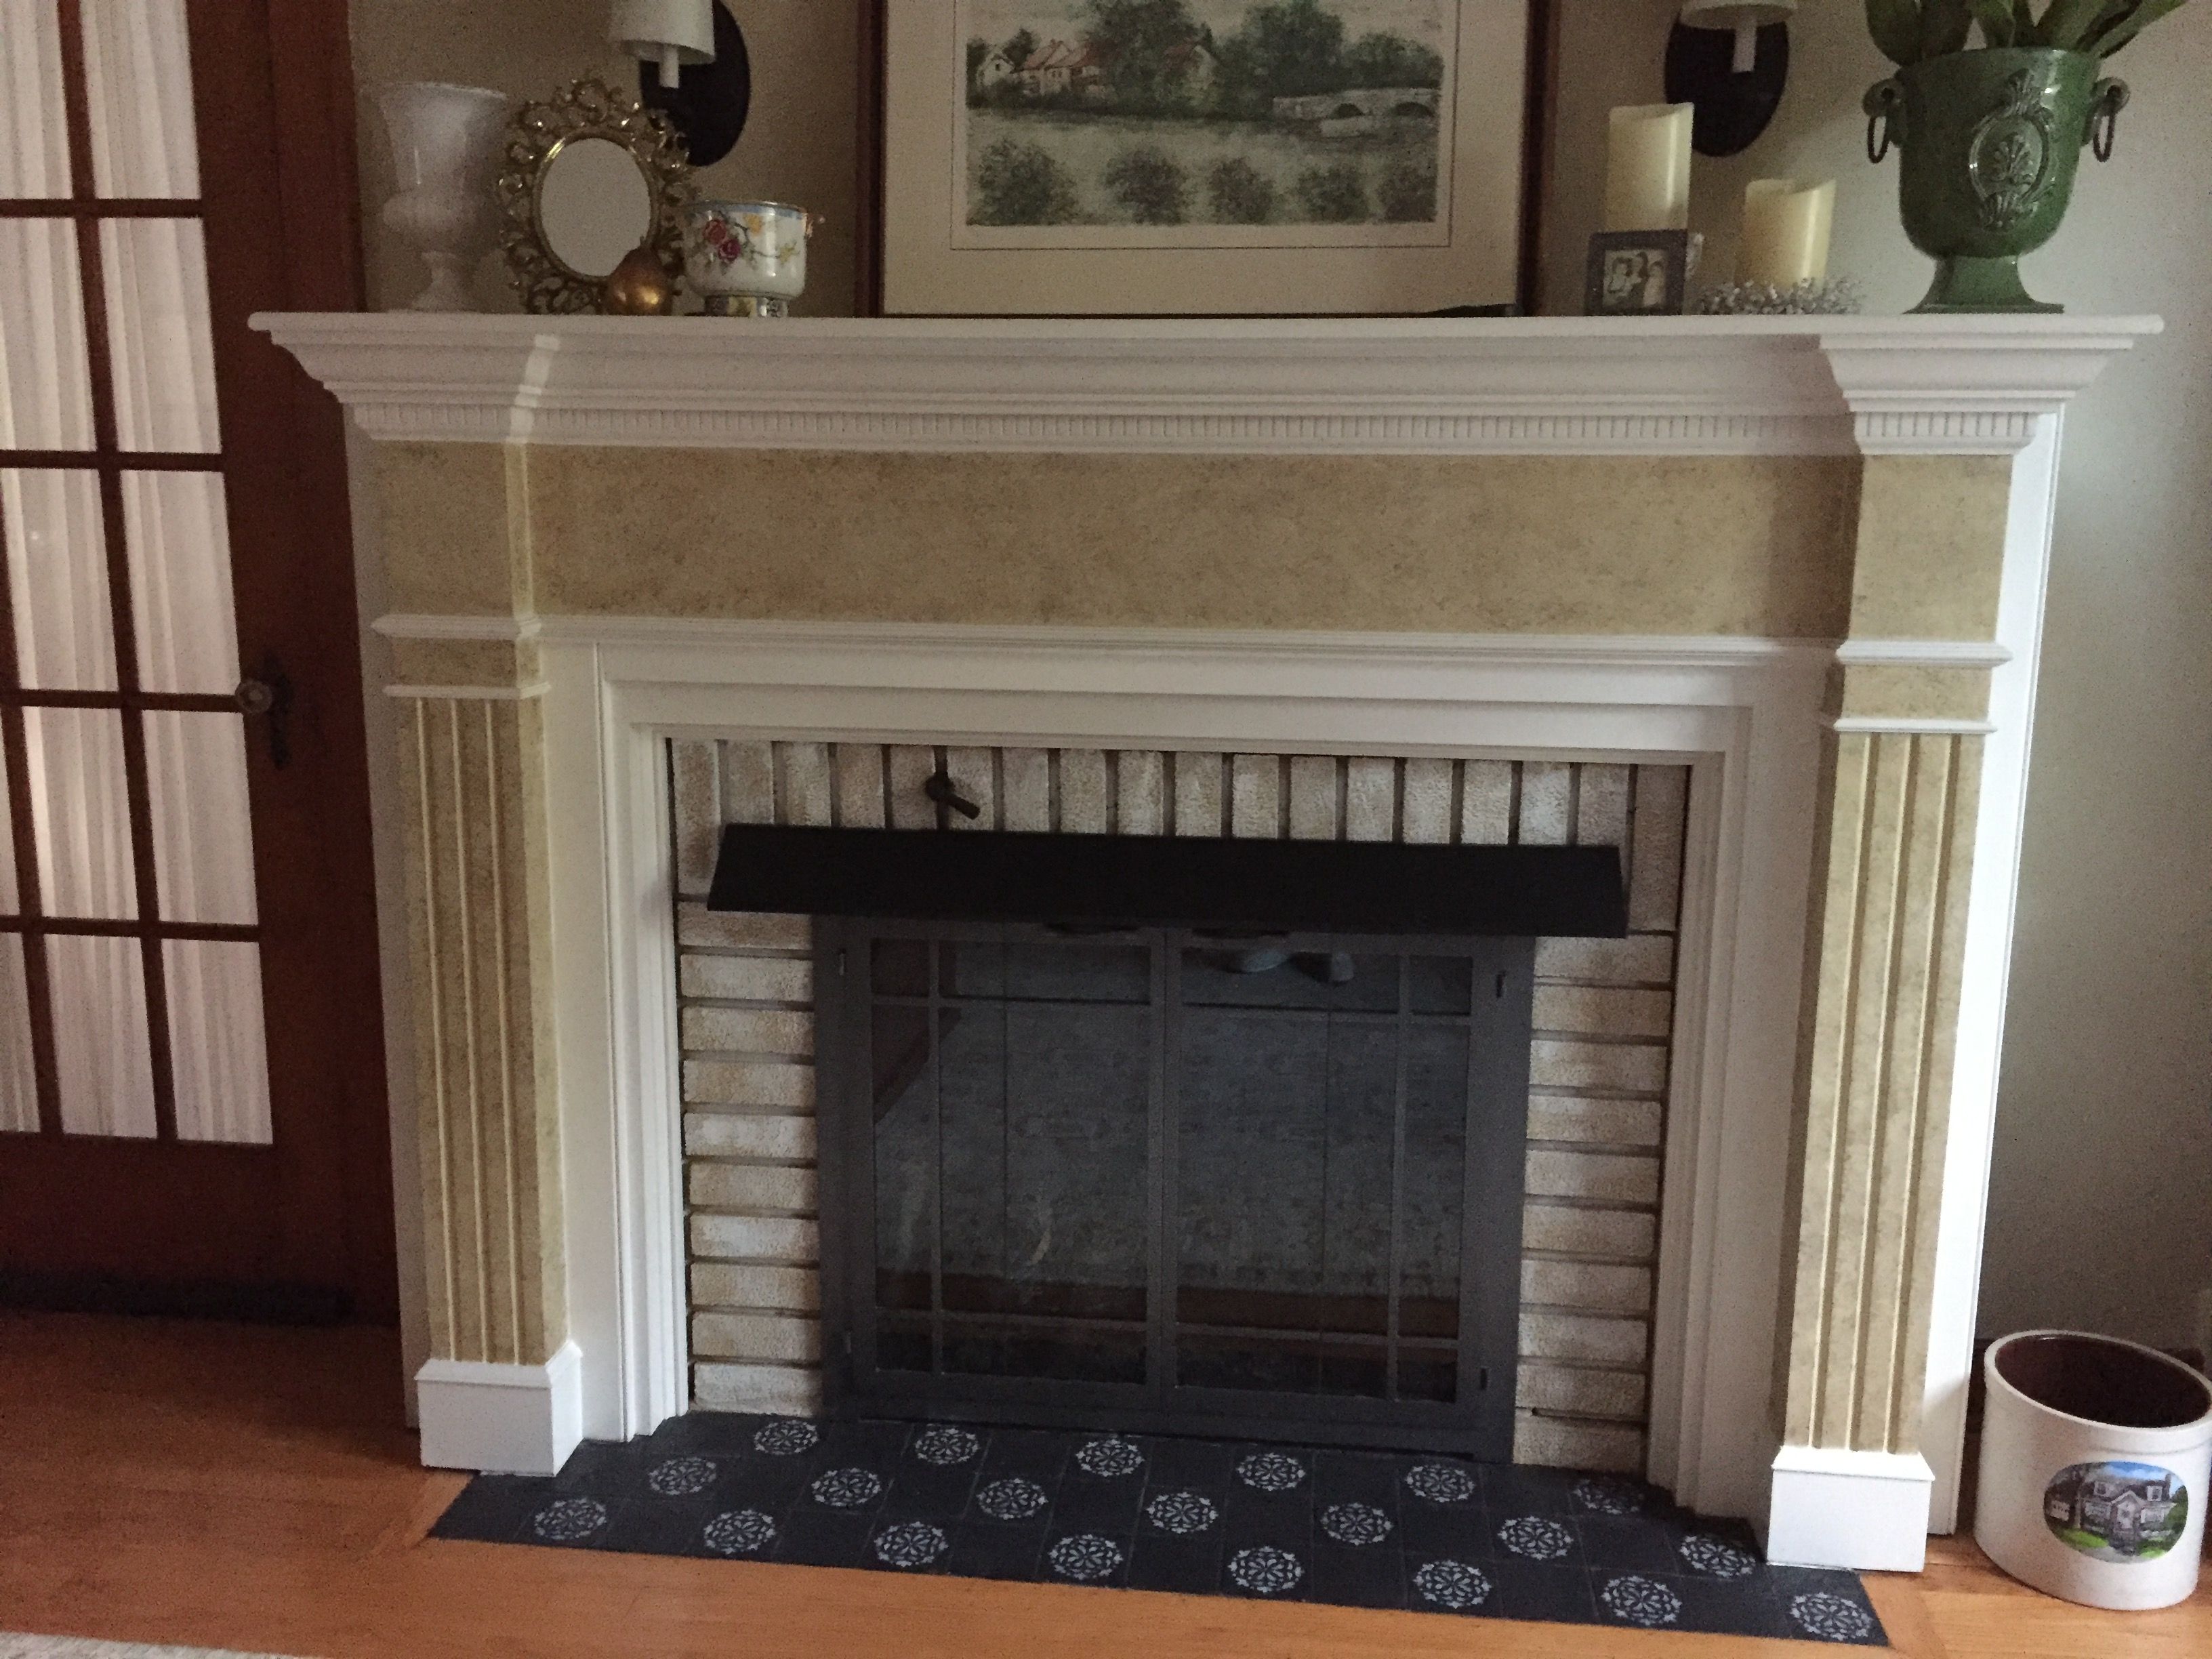 Tile Fireplace Mantel New Stencil Over Black Tile Just to Jazz Up the Fireplace